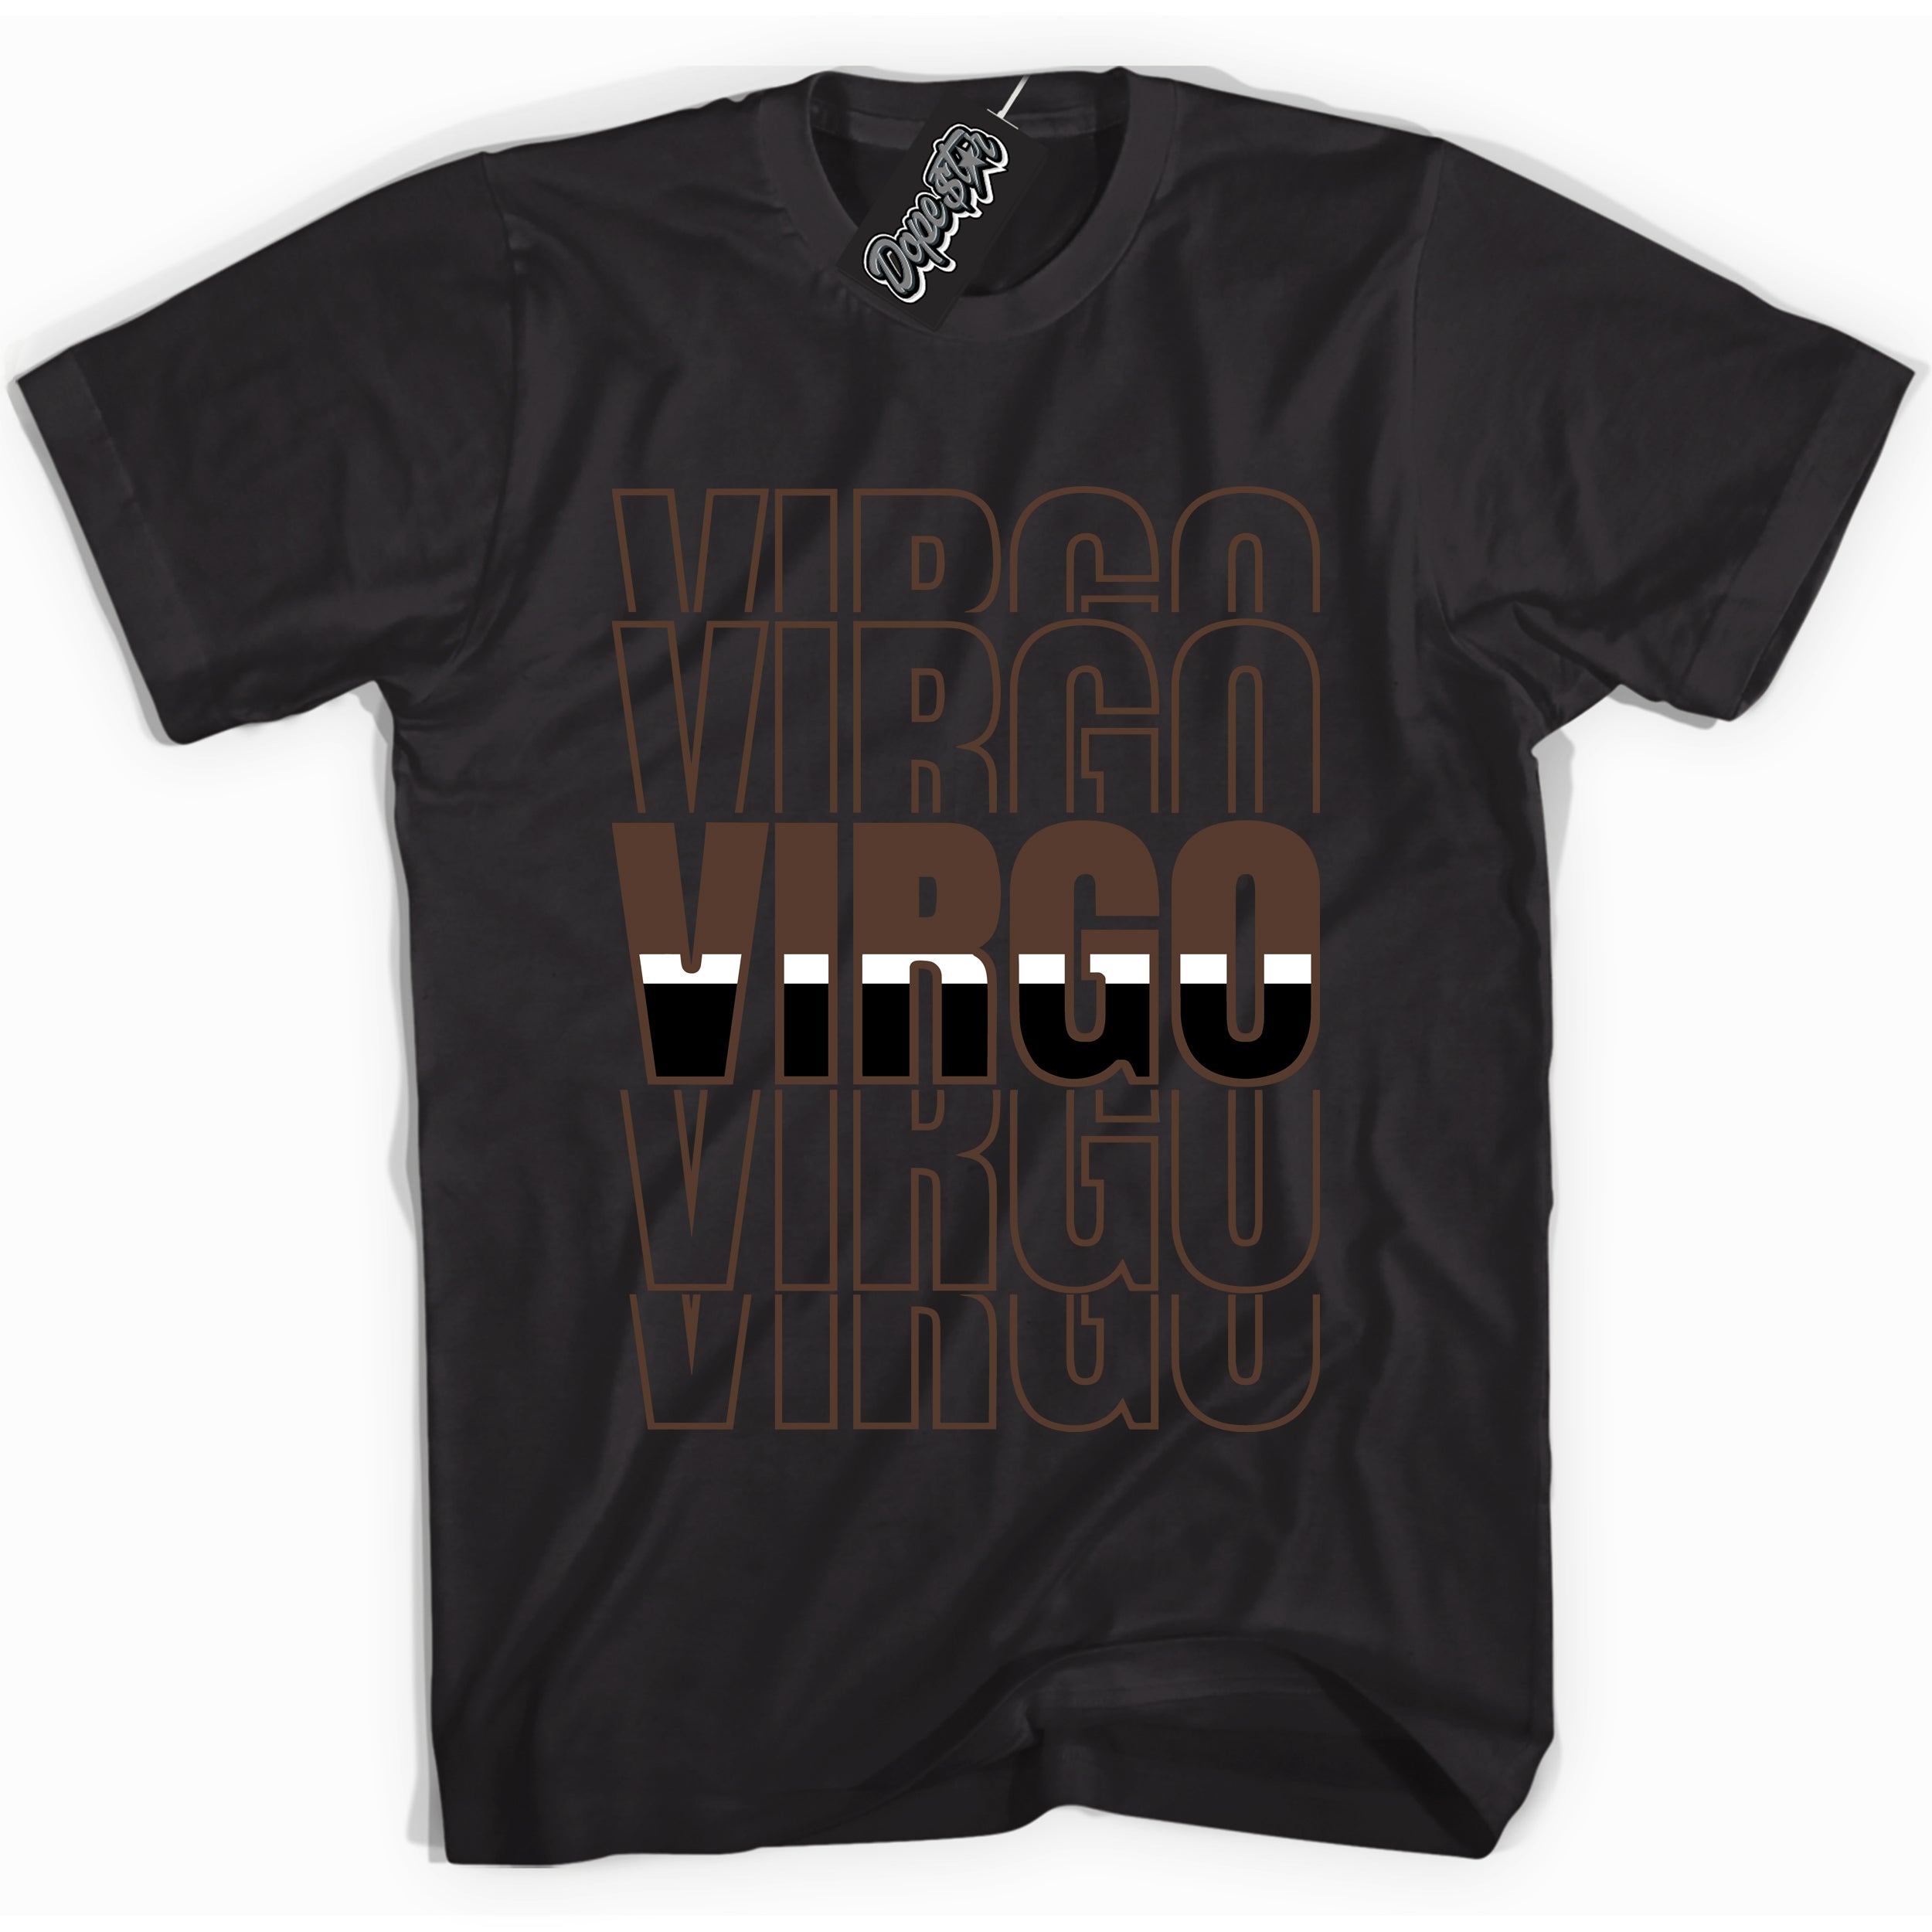 Cool Black graphic tee with “ Virgo ” design, that perfectly matches Palomino 1s sneakers 